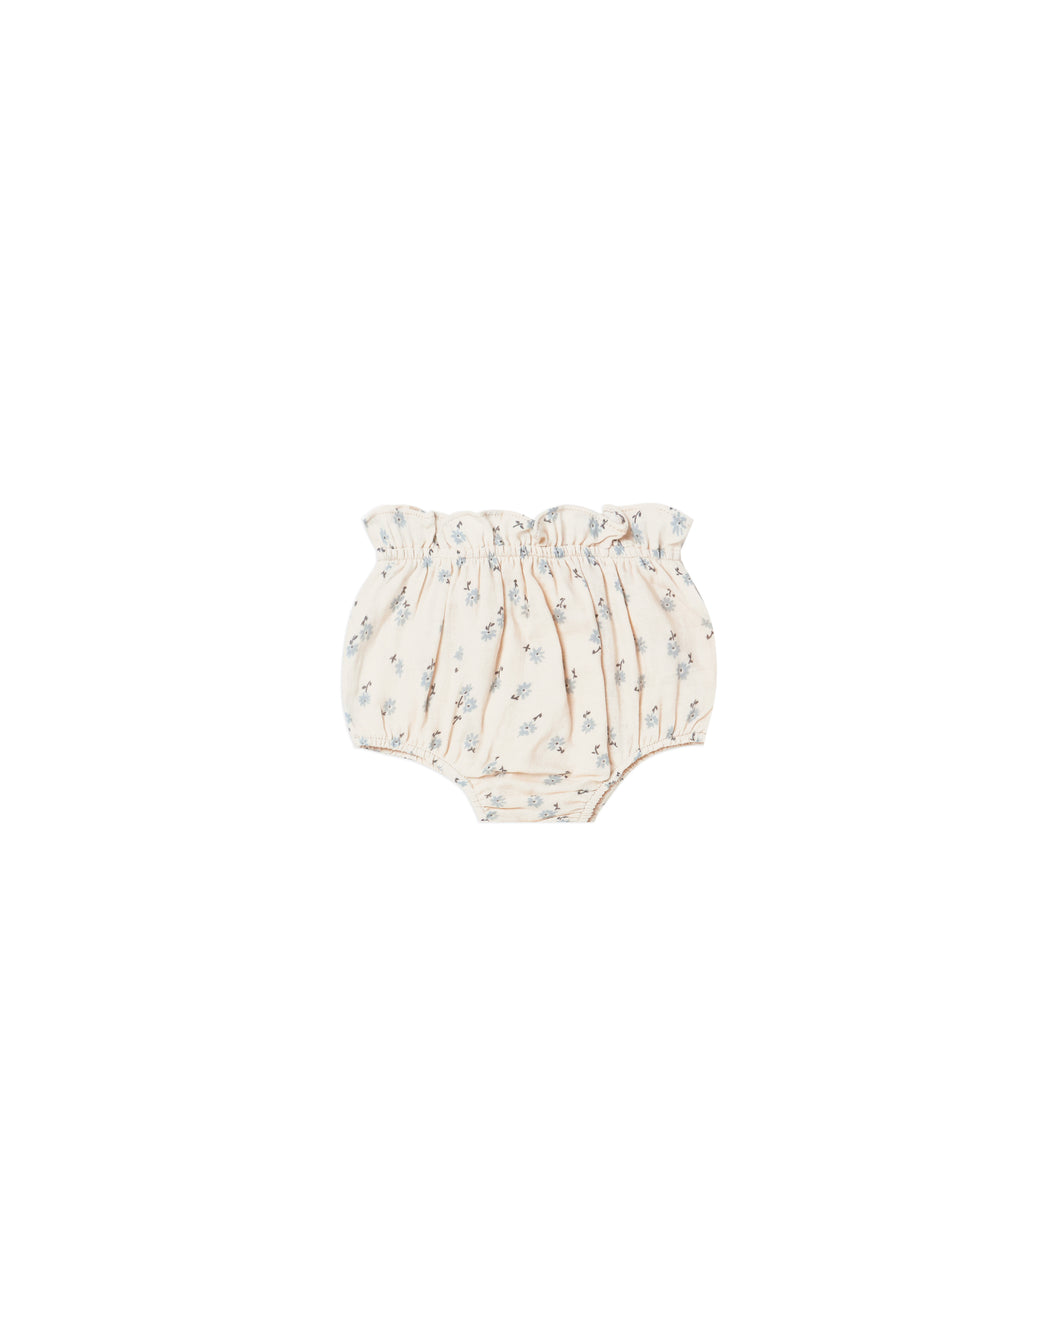 Nellie ruffle bloomer - blue ditsy